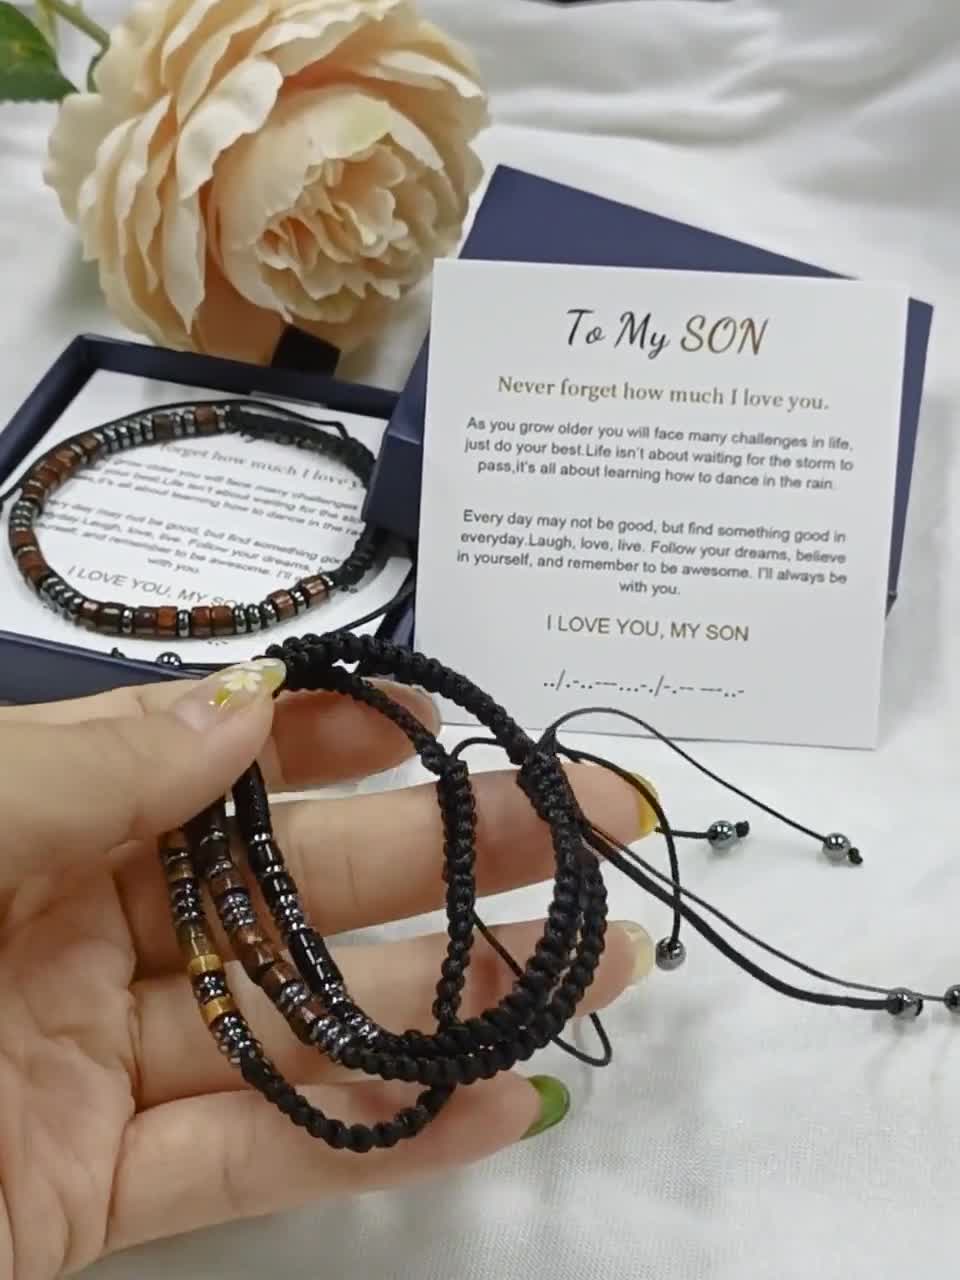 To My Son I Love You Morse Code Bracelet With Card Adjustable Message  Bracelets Son Gift from Mom Dad Birthday Chrismas Gift